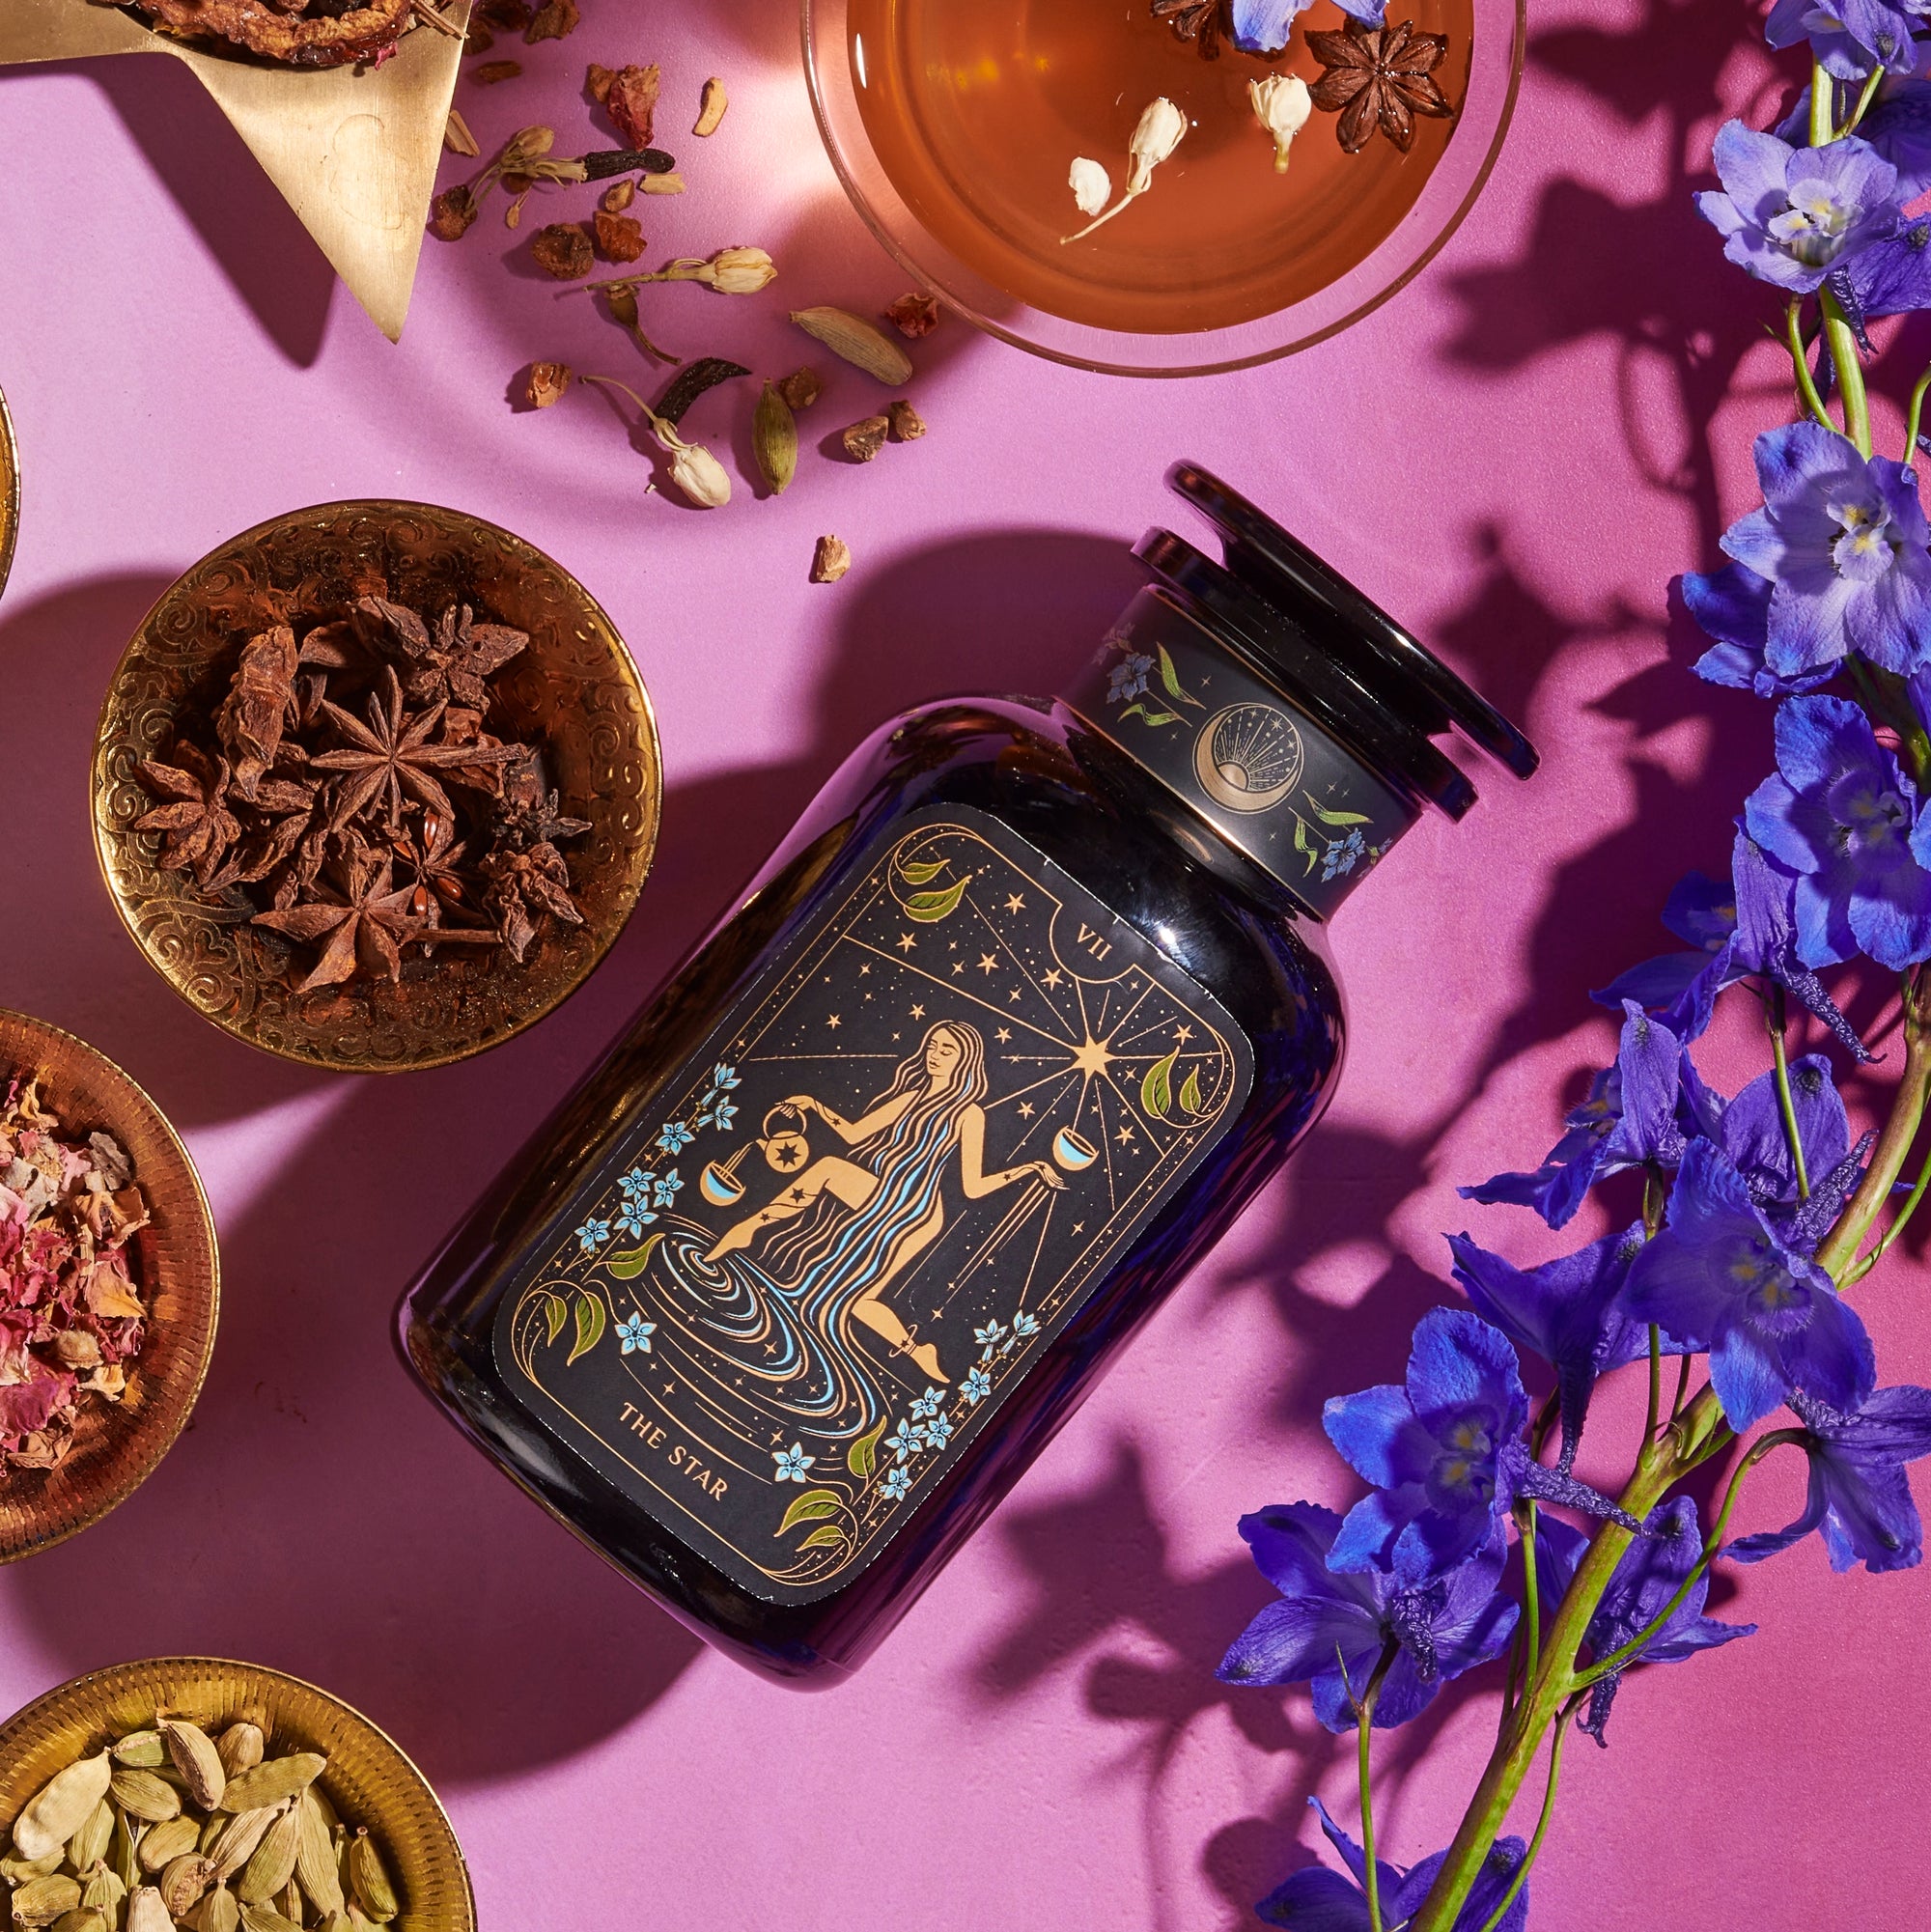 An intricately designed dark bottle labeled "Monthly Magic 3-Month Tea Subscription Box" by Magic Hour lies on a pink surface, surrounded by various spices in small bowls, blue flowers, and a cup of Magic Hour Tea with anise stars floating in it. The bottle features an illustration of a woman in a serene setting.